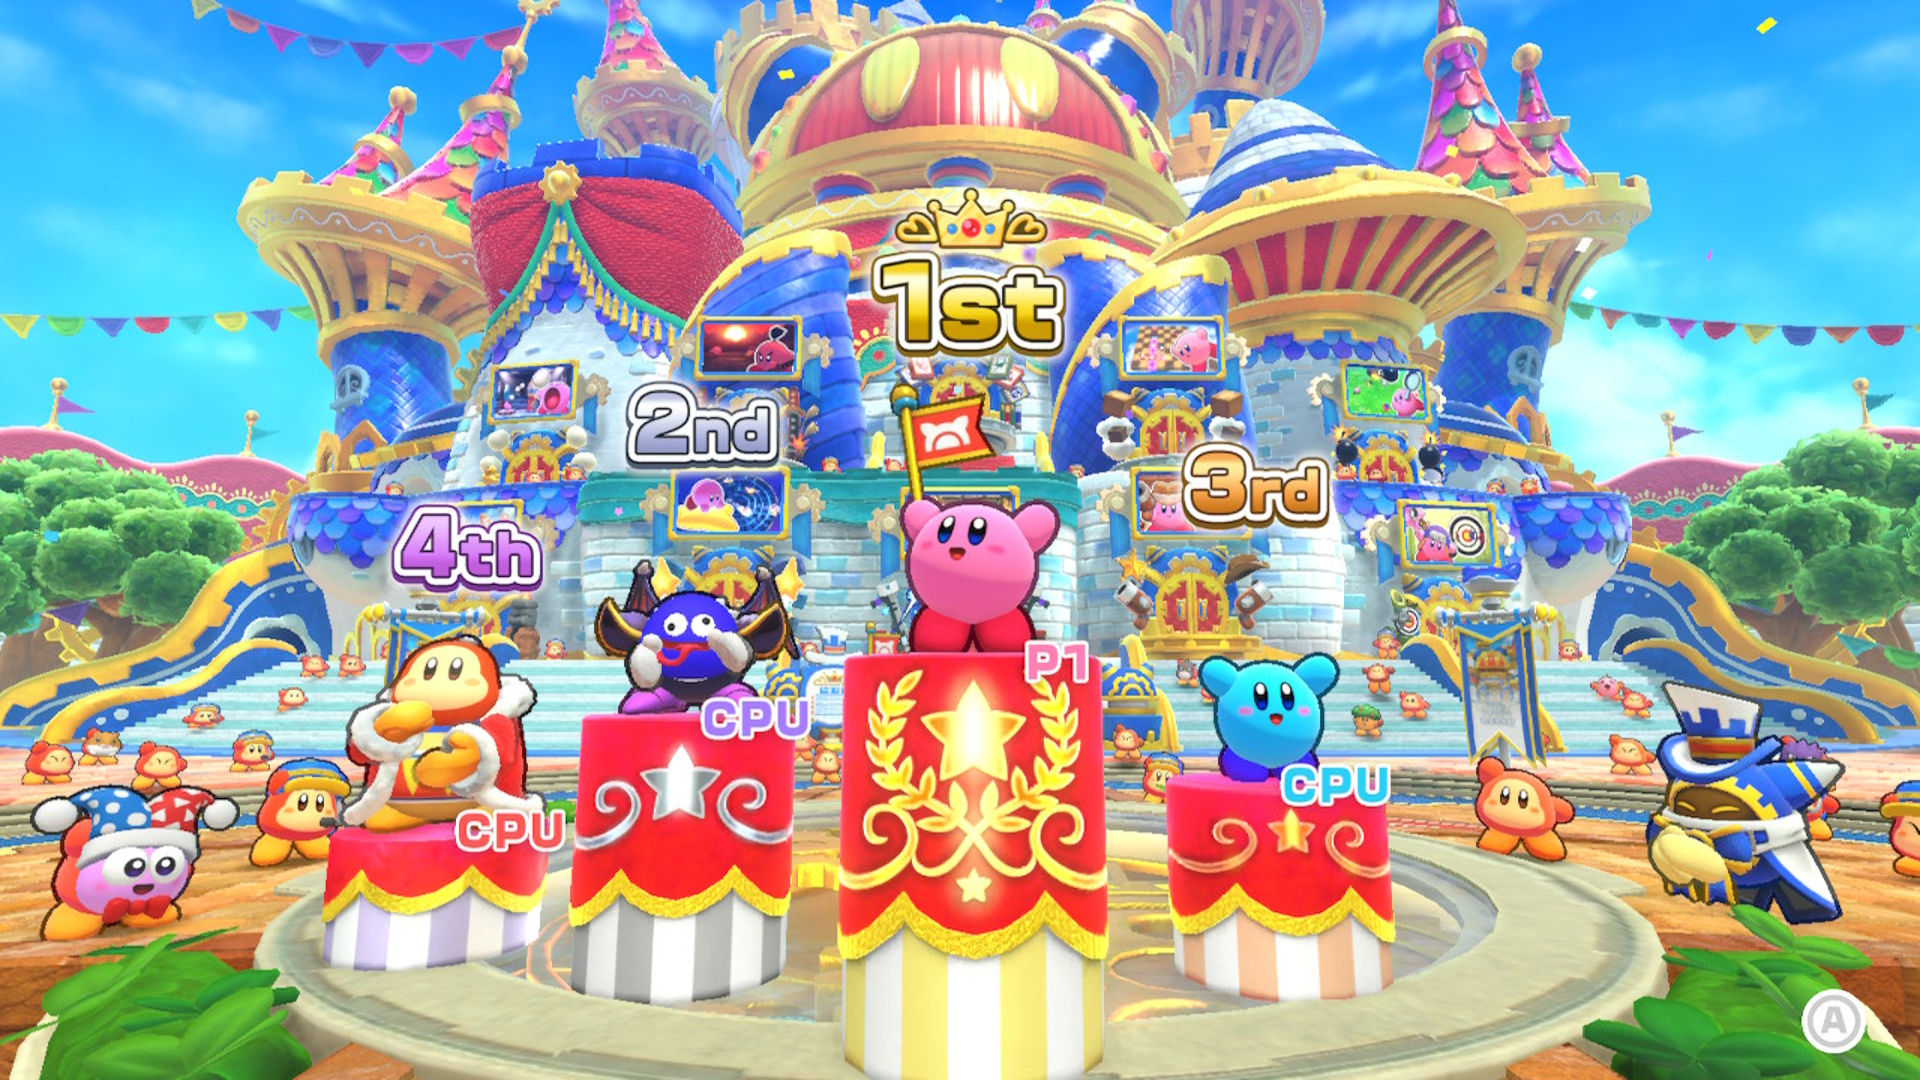 Review: 'Kirby's Return to Dream Land' brings back an overlooked gem